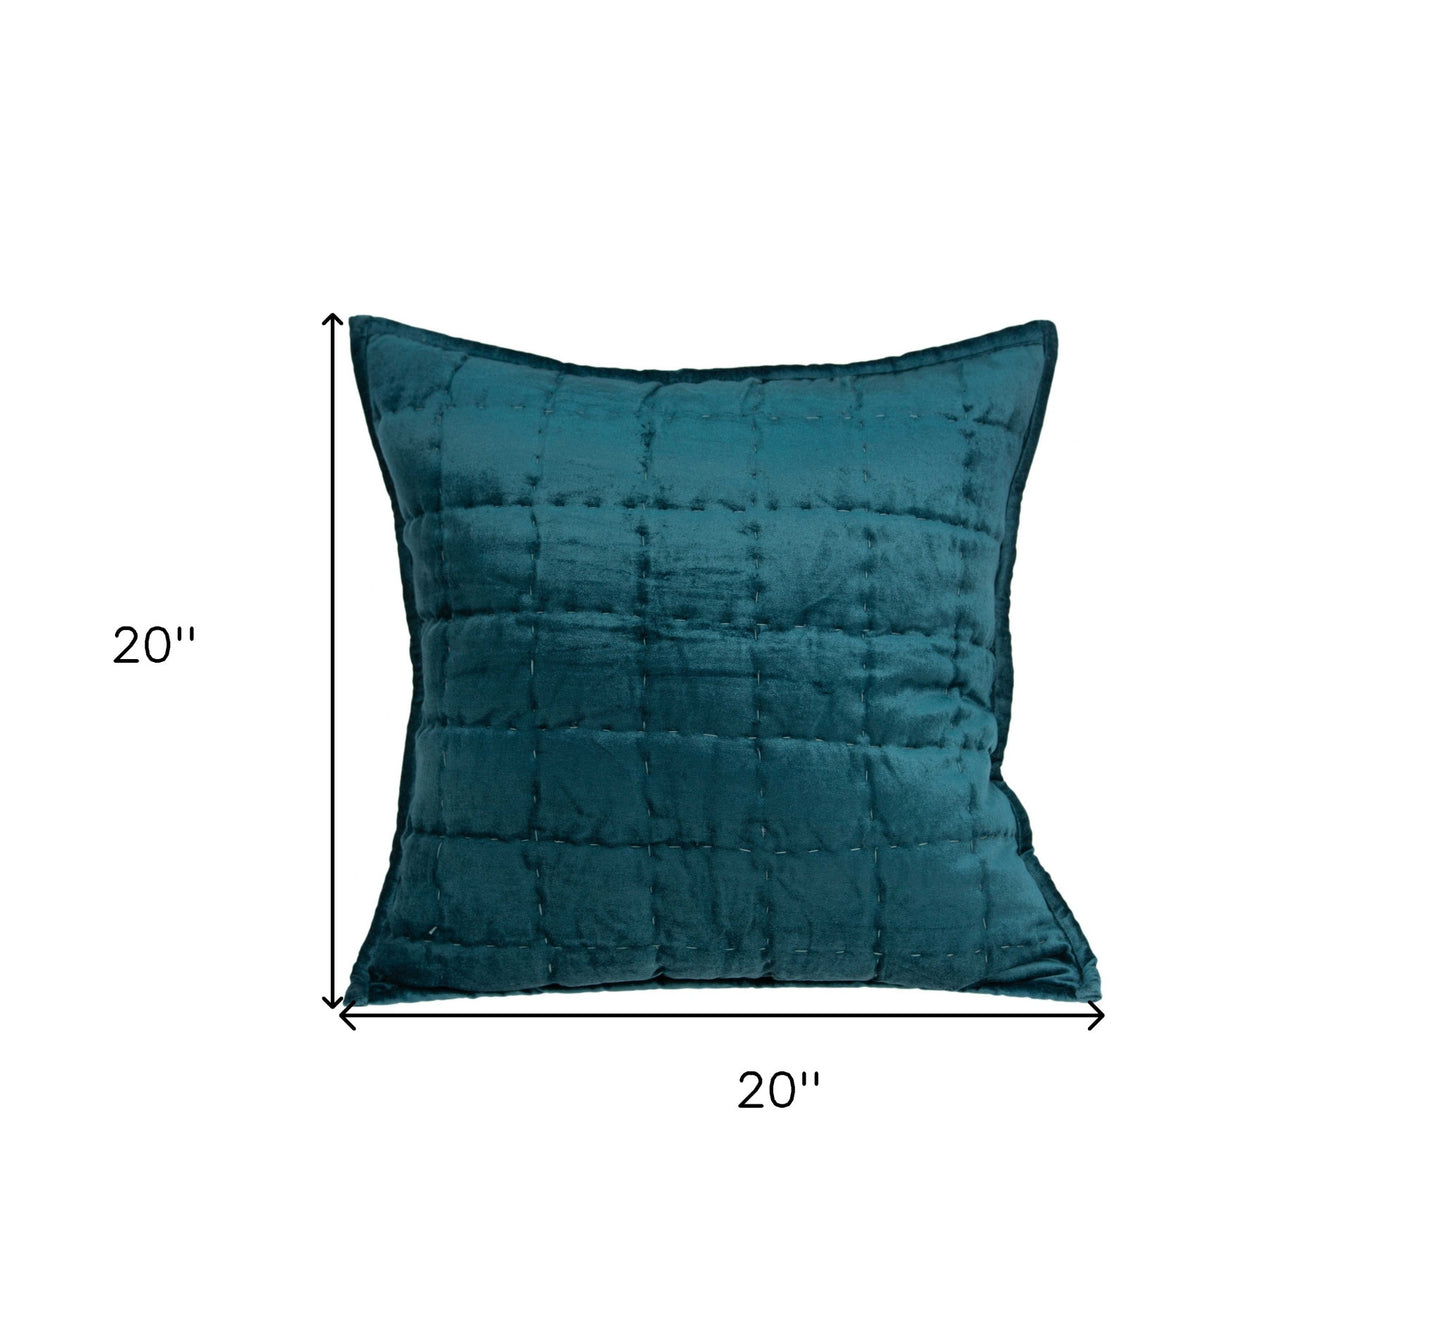 20" X 7" X 20" Transitional Teal Solid Quilted Pillow Cover With Poly Insert